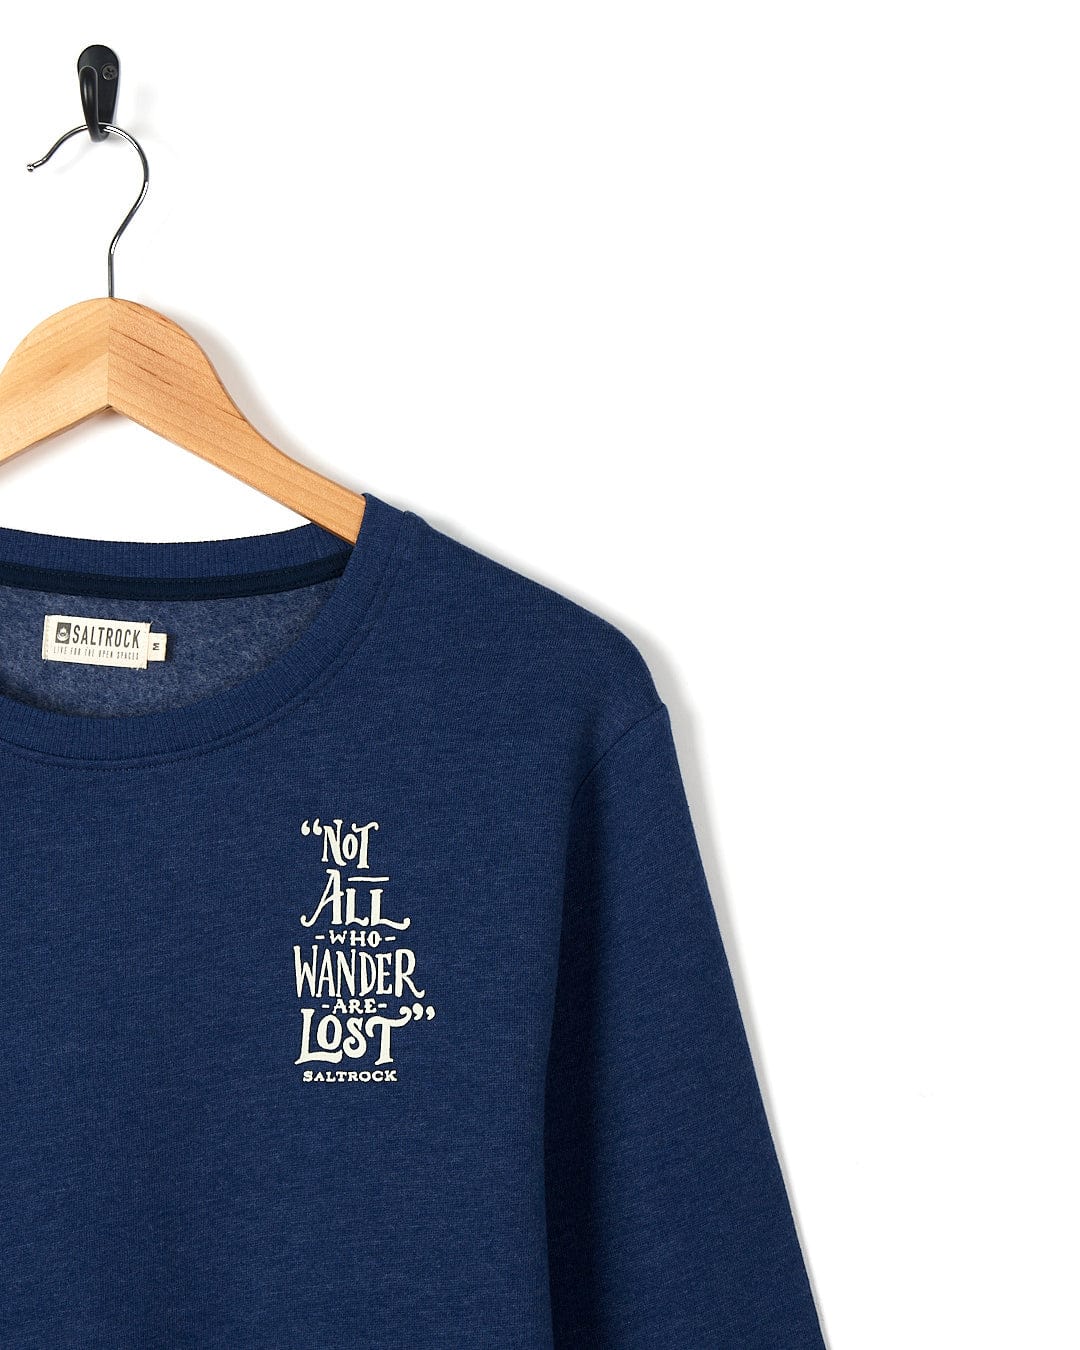 A Lost Ships - Mens Crew Sweat - Dark Blue with a quote on it that says we are all winners and losers, by Saltrock.